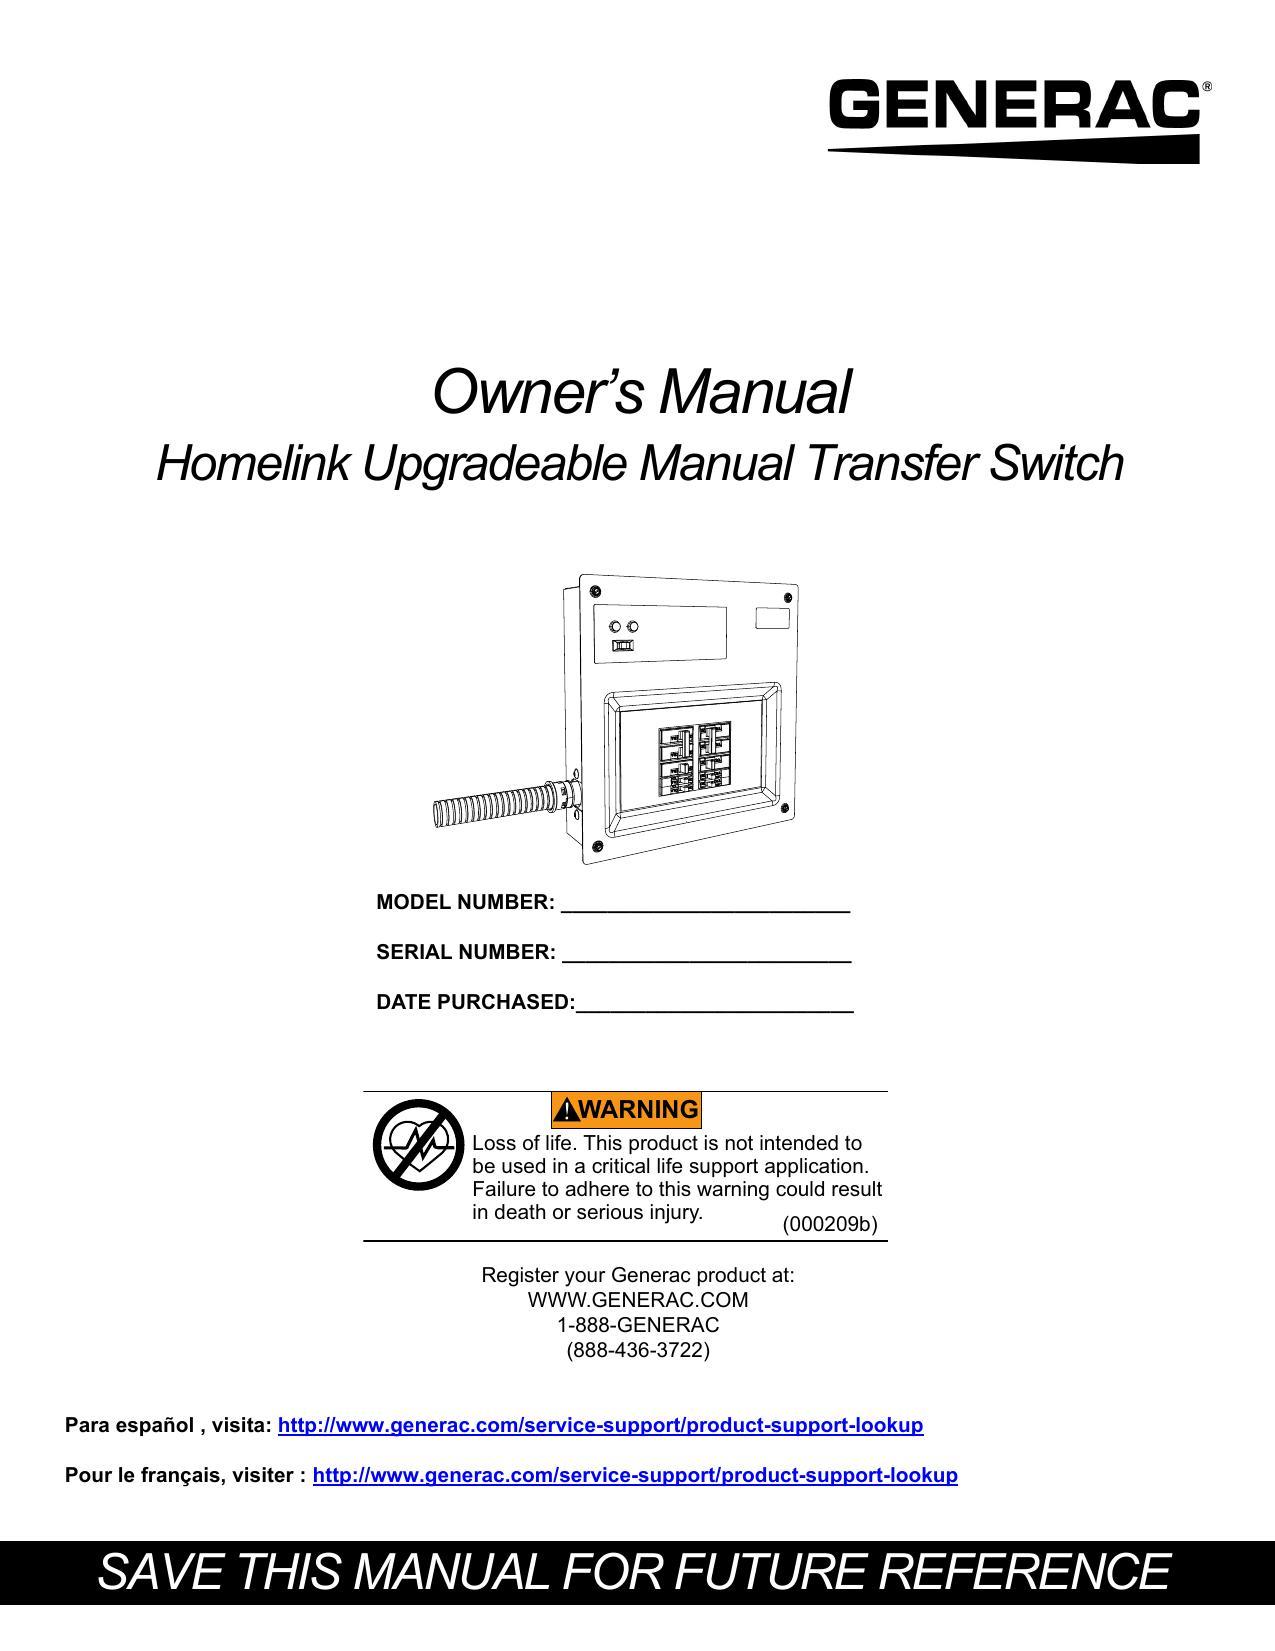 homelink-upgradeable-manual-transfer-switch-owners-manual.pdf